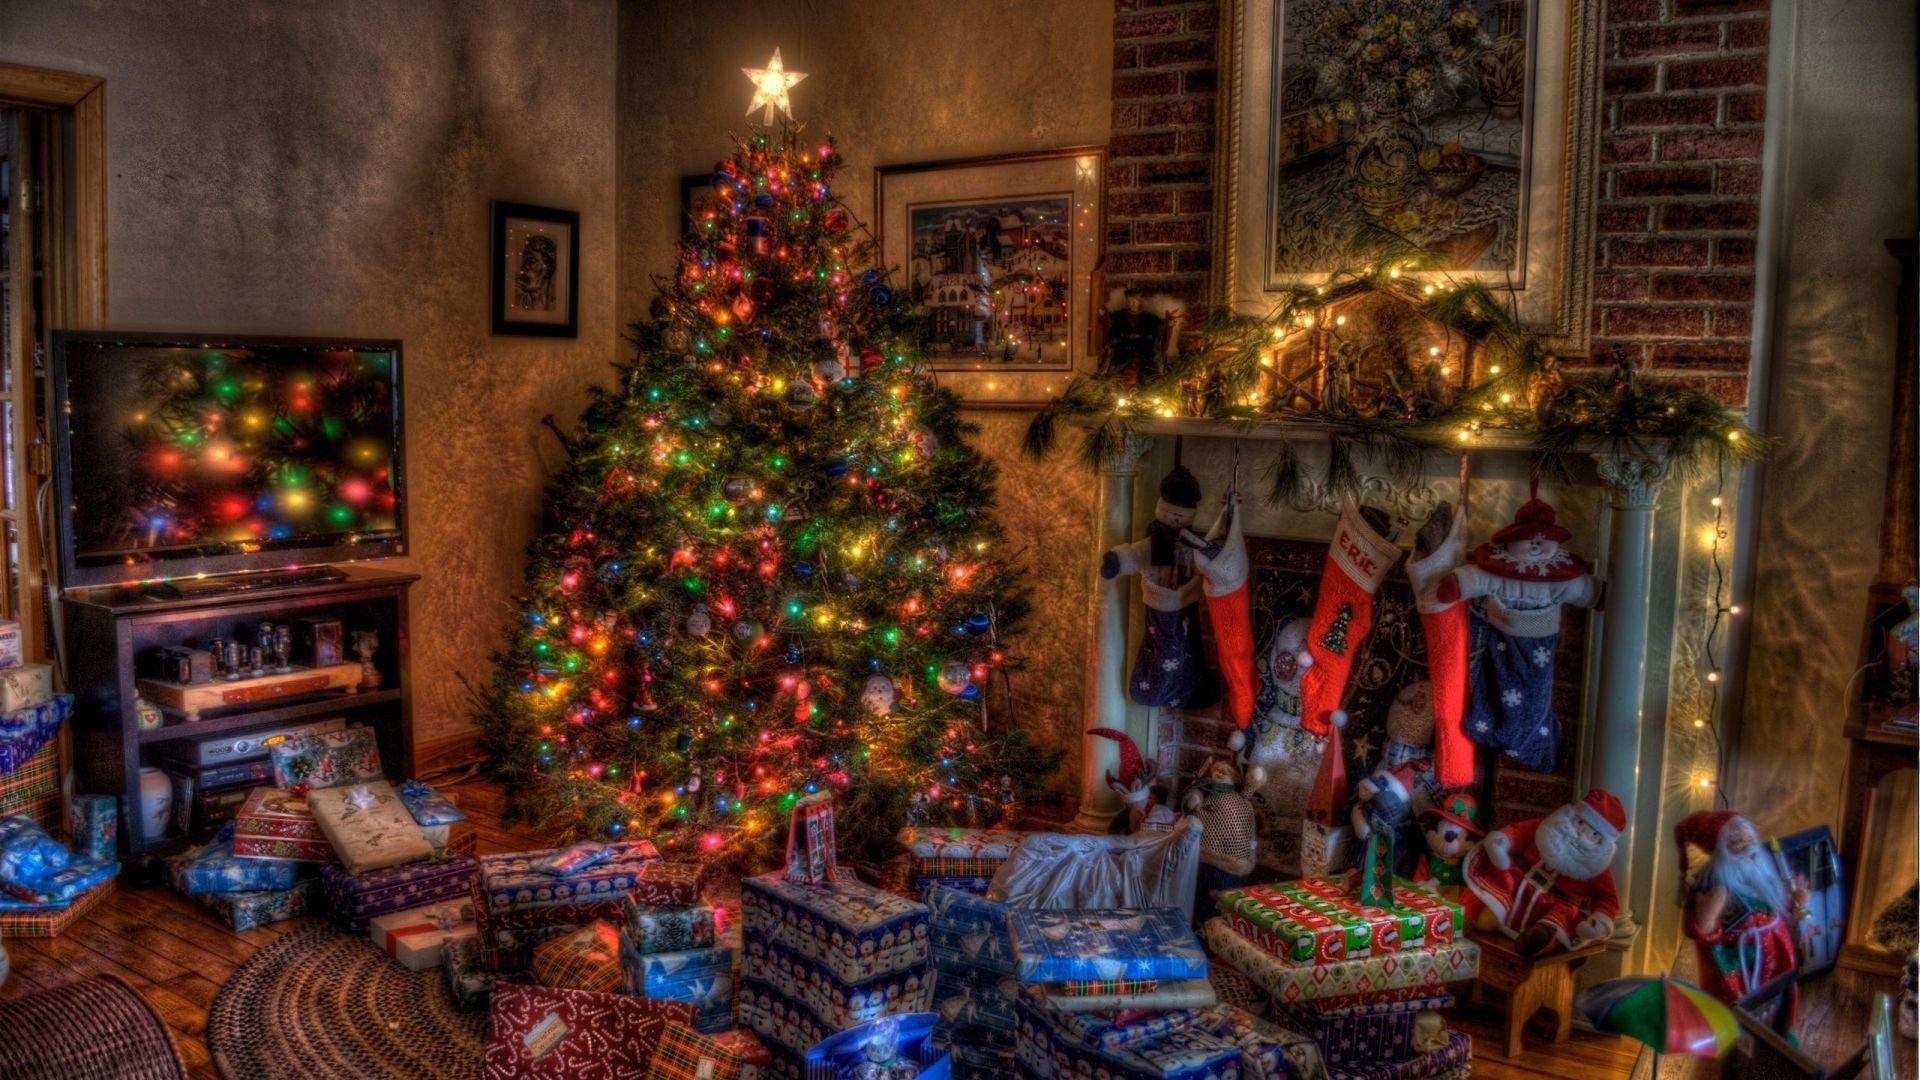 HD Wallpaper Widescreen 1080P 3D. tree, christmas, presents, fireplace, holiday, toys, stockings, ho. Christmas tree with gifts, Christmas night, Christmas tree